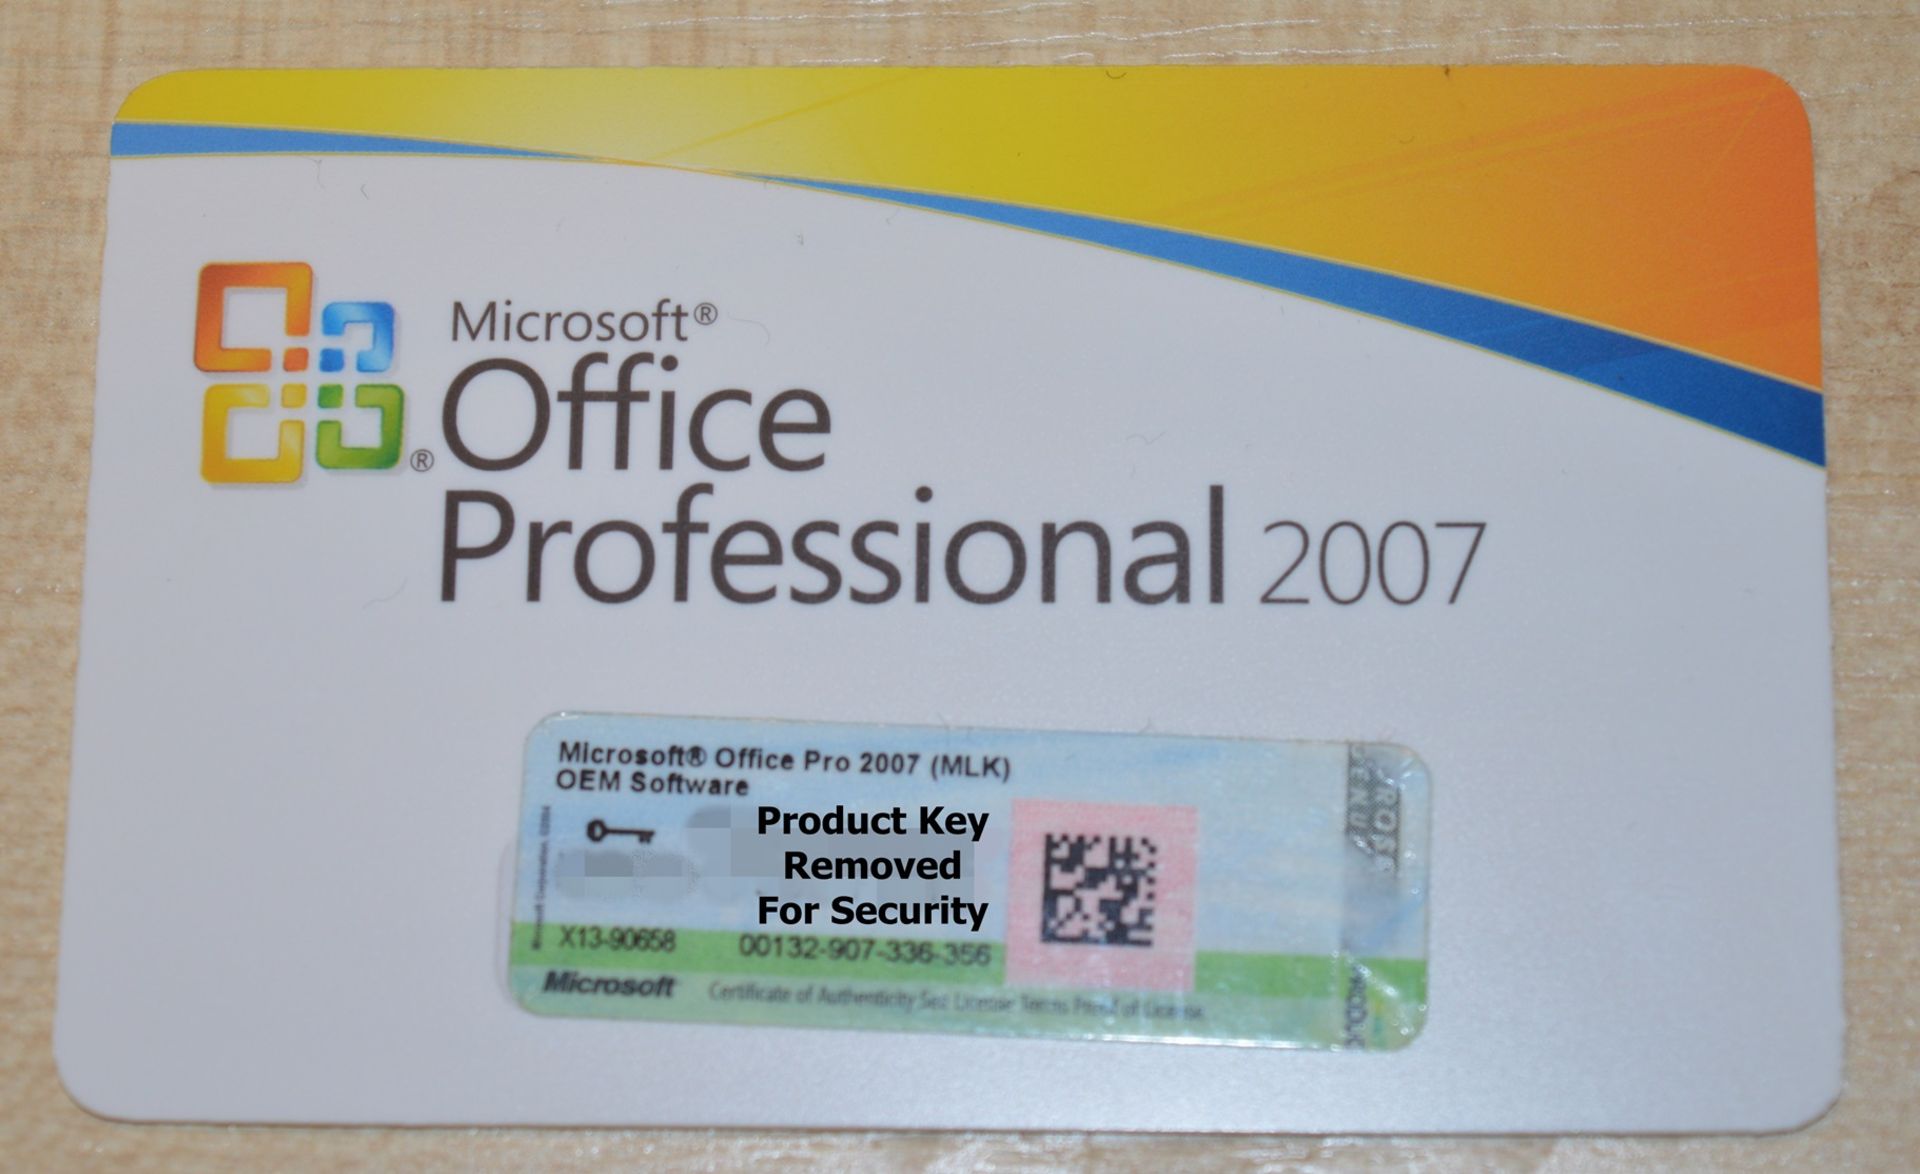 1 x Microsft Office 2007 Professional COA - Features Word, Excel, Powerpoint, Outlook Publisher - Image 3 of 3